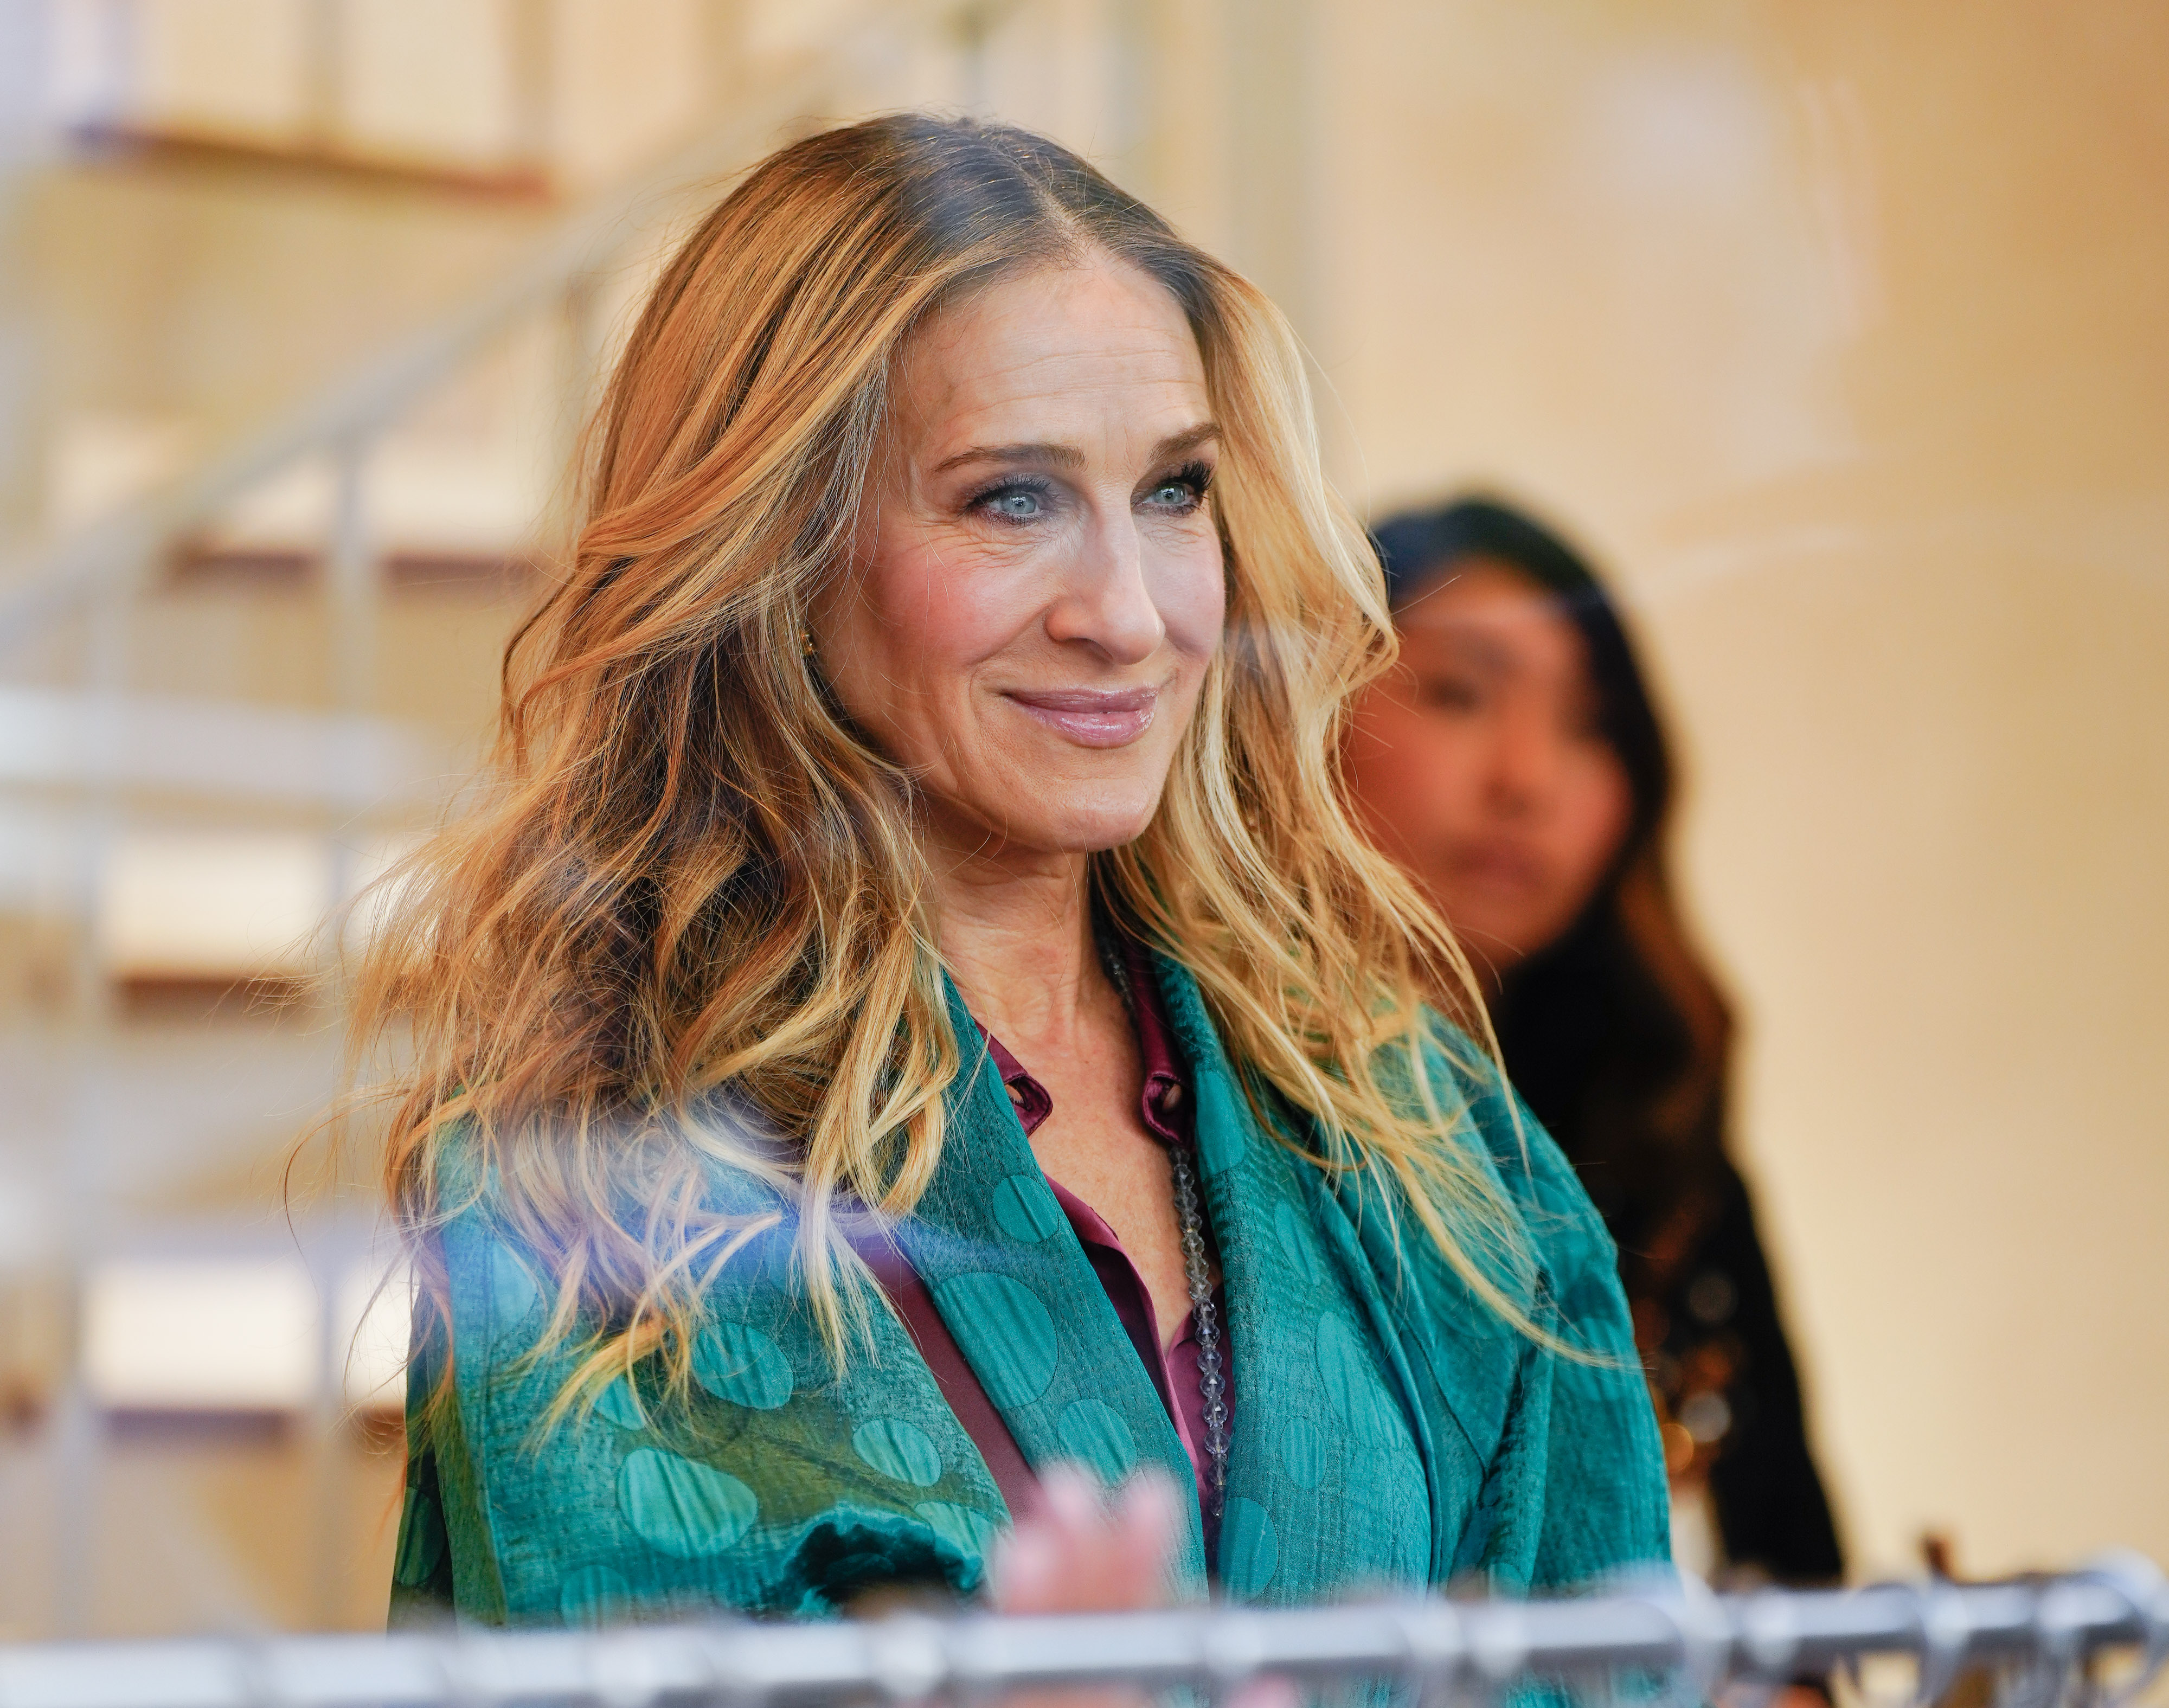 Sarah Jessica Parker on January 9, 2023 | Source: Getty Images